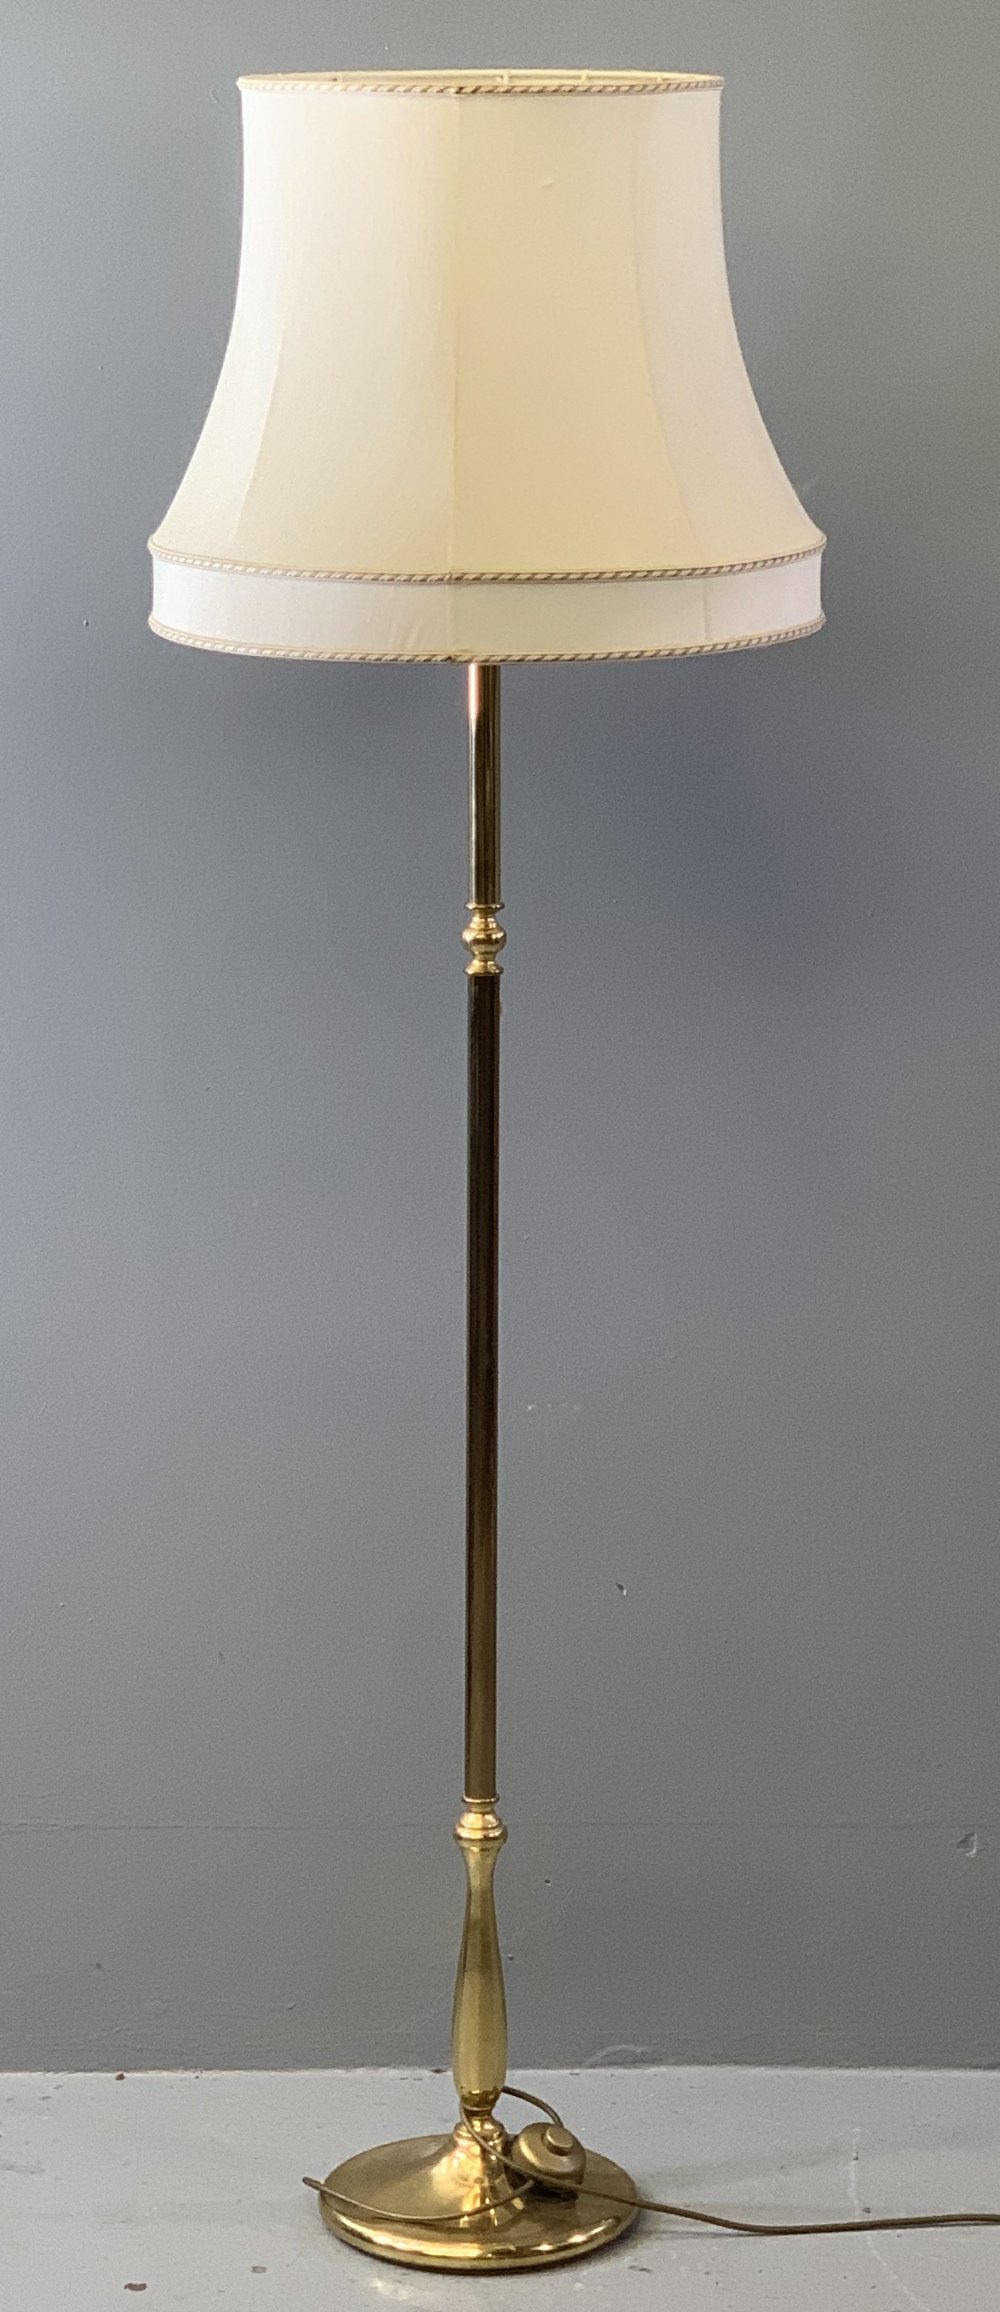 MODERN BRASS STANDARD LAMP with large cream coloured shade, antique wooden doll's cot, beaten - Image 2 of 3